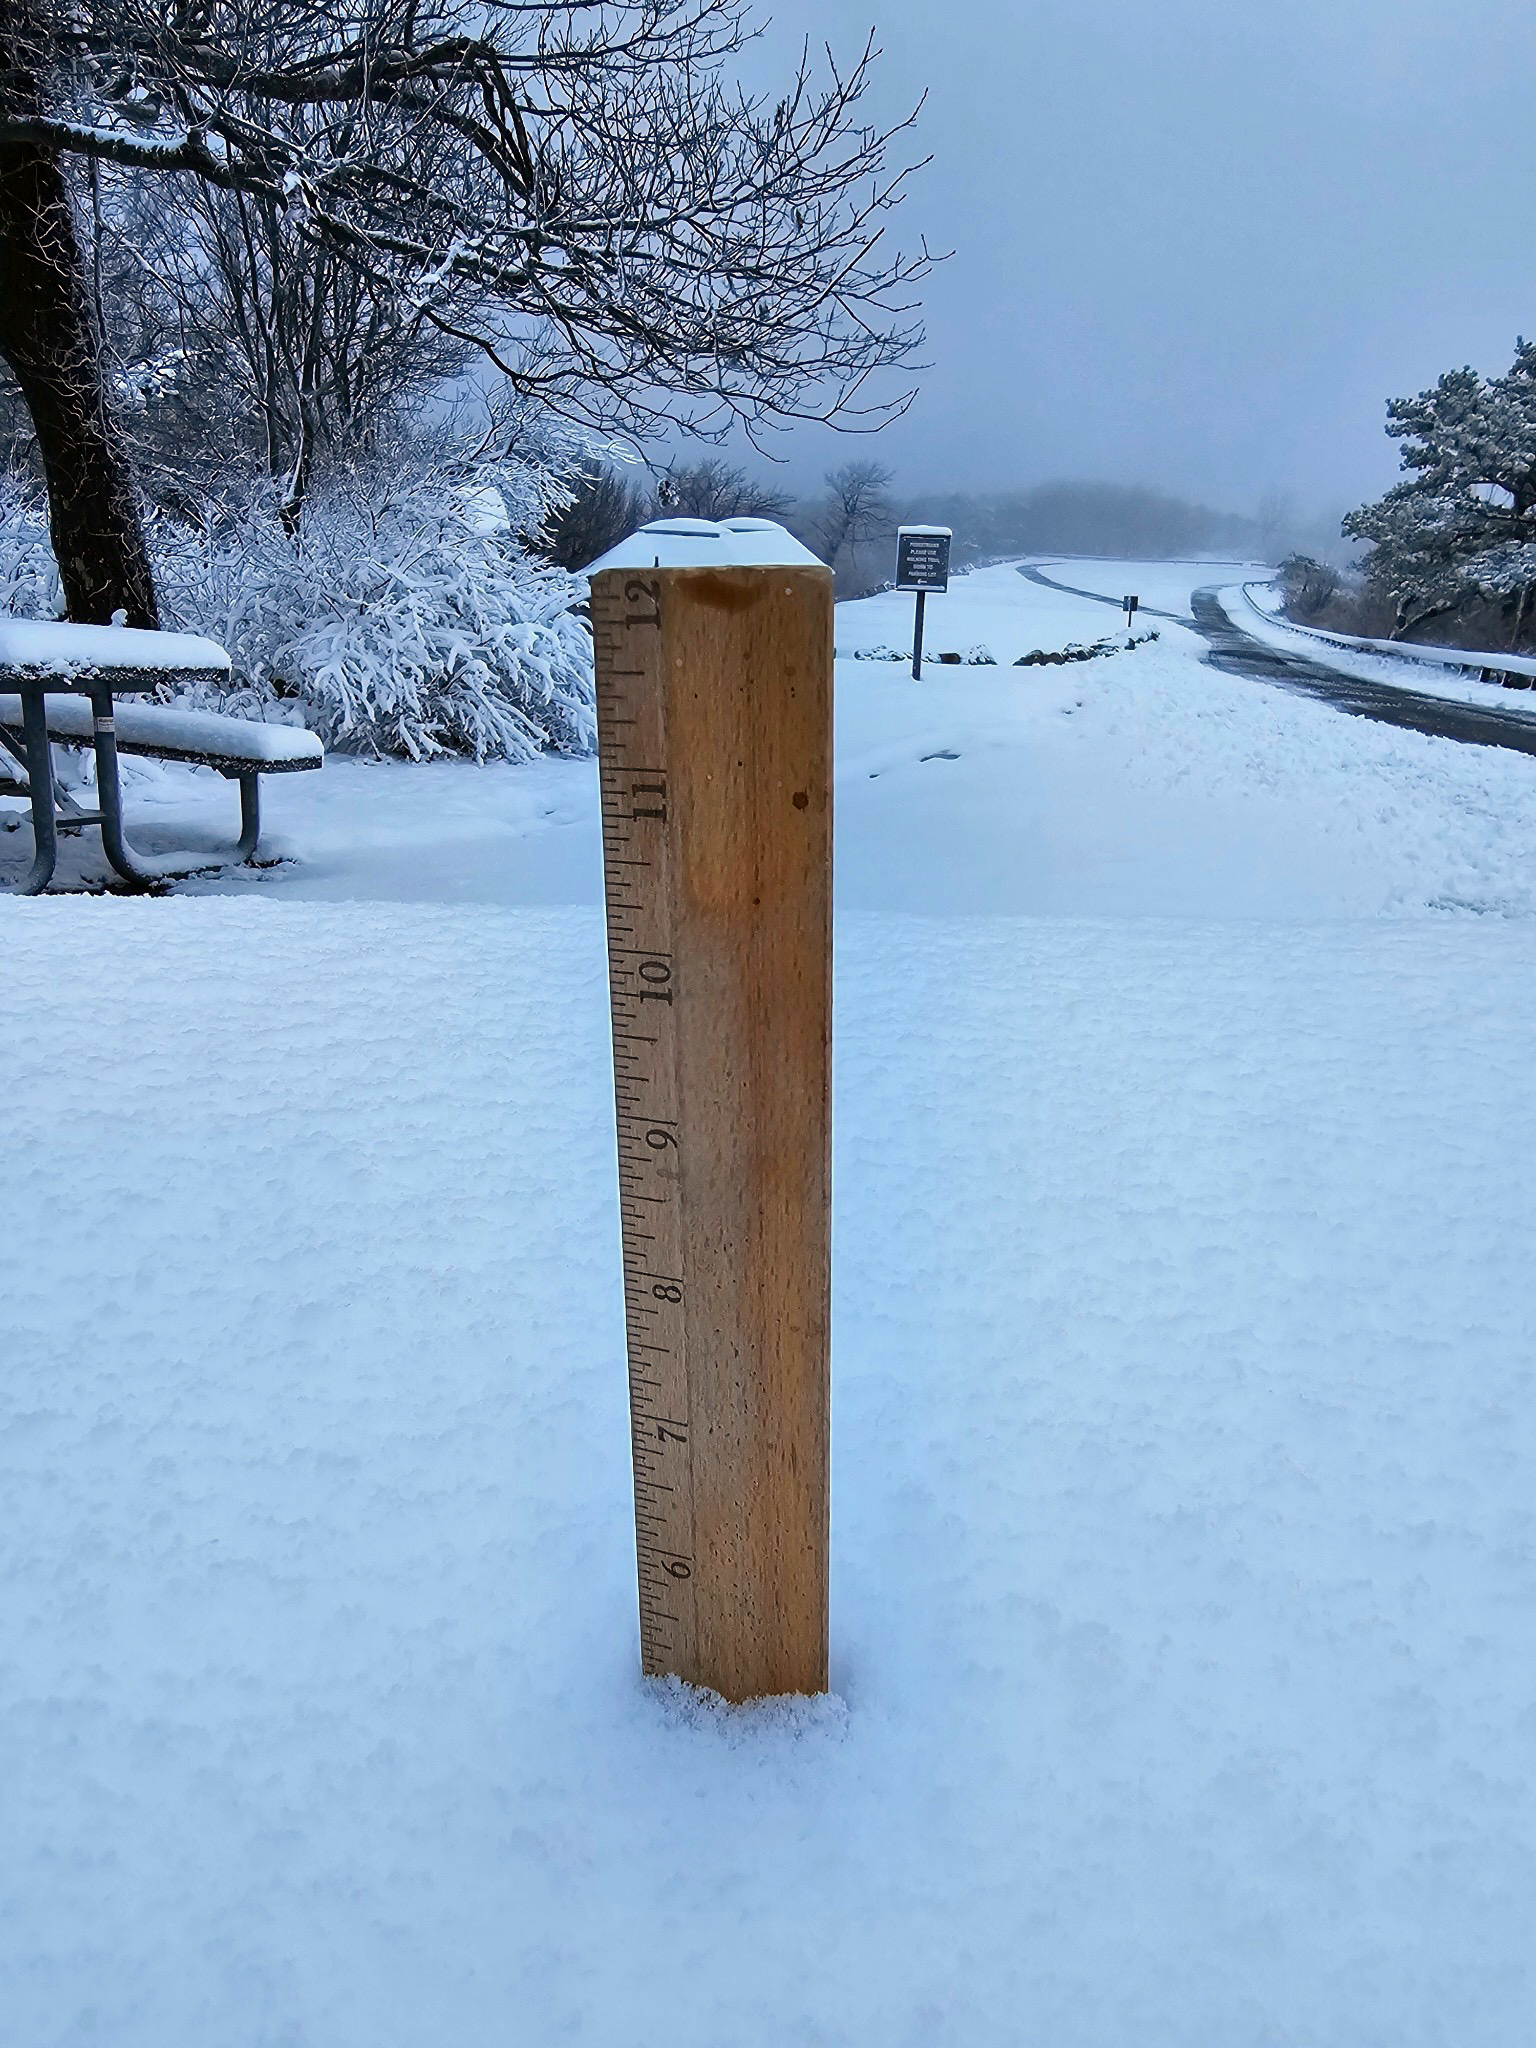  The 5.1” snowfall at High Point Monument on the morning of December 11th (courtesy of Shawn Viggiano).